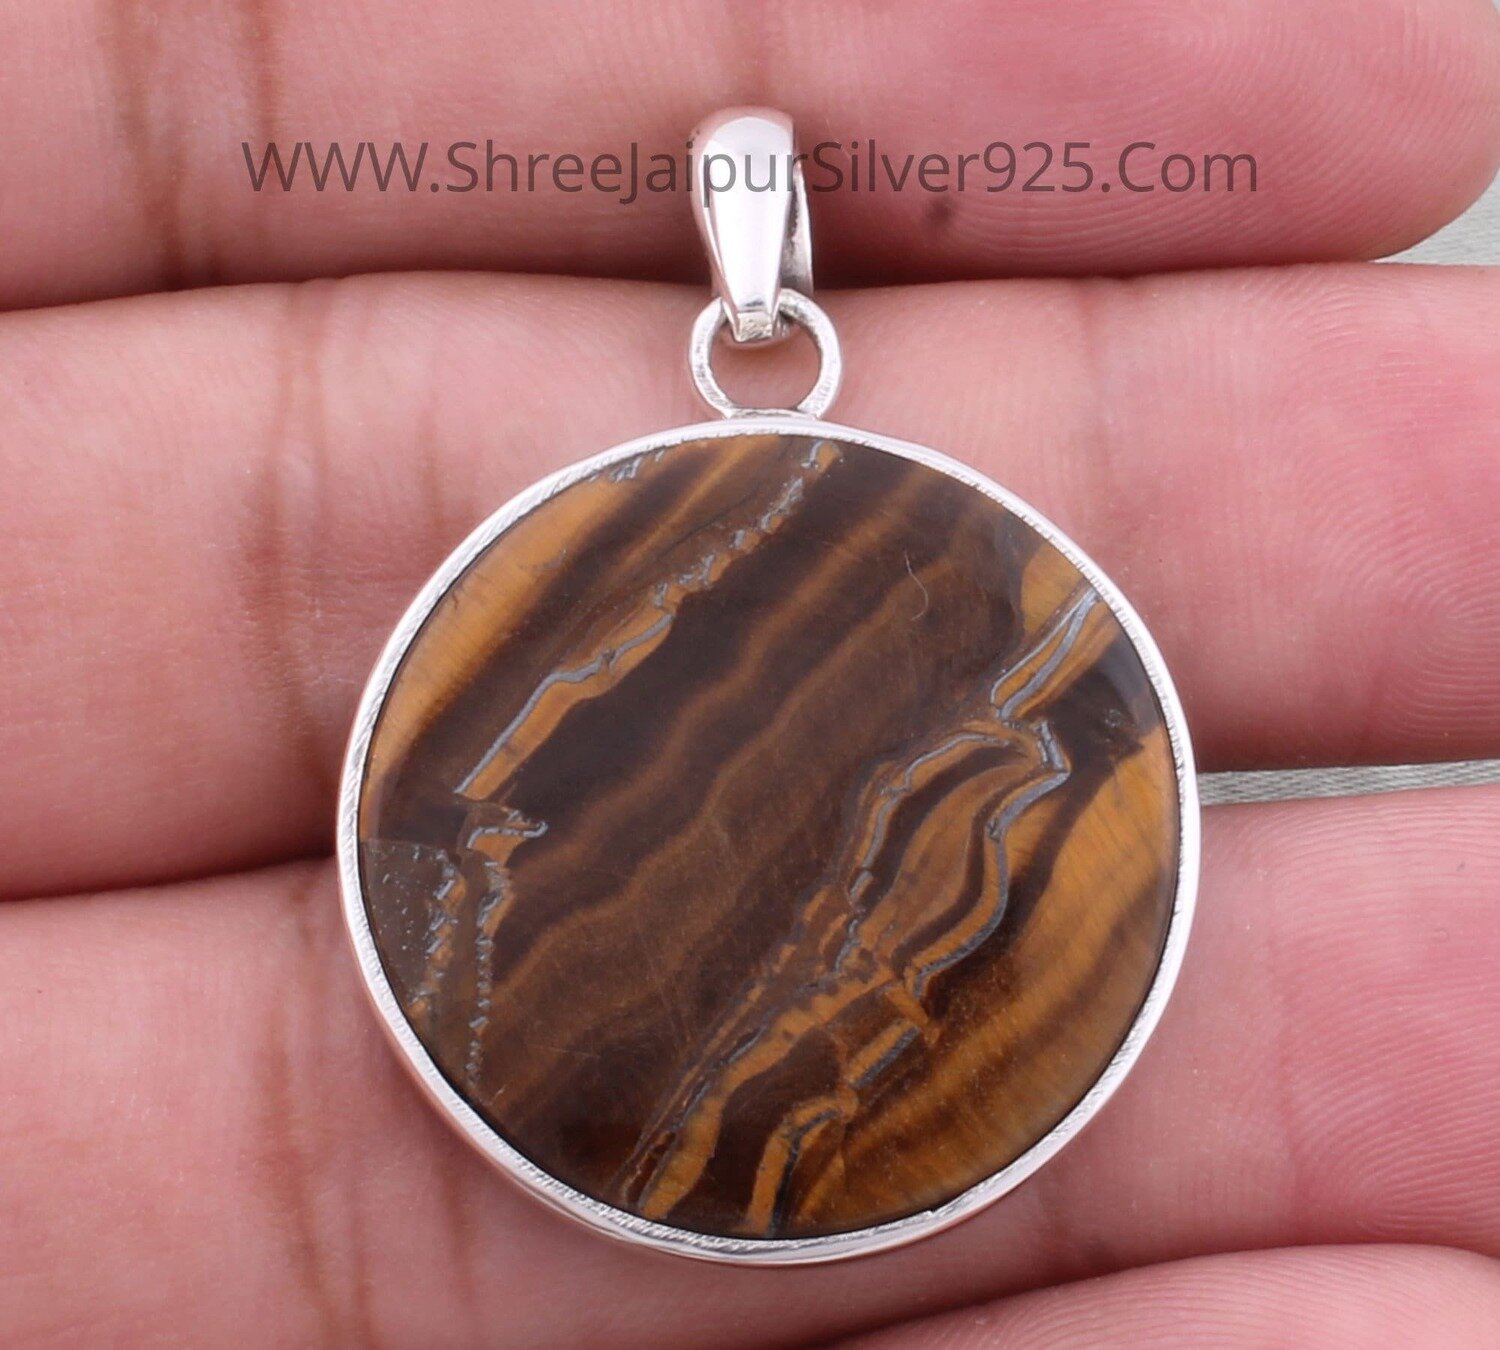 Tiger's Coin Eye Pendant Necklace, 925 Sterling Silver Tiger Eye Round Shape Pendant, Handmade Gemstone Pendant, Women Jewelry For Gift